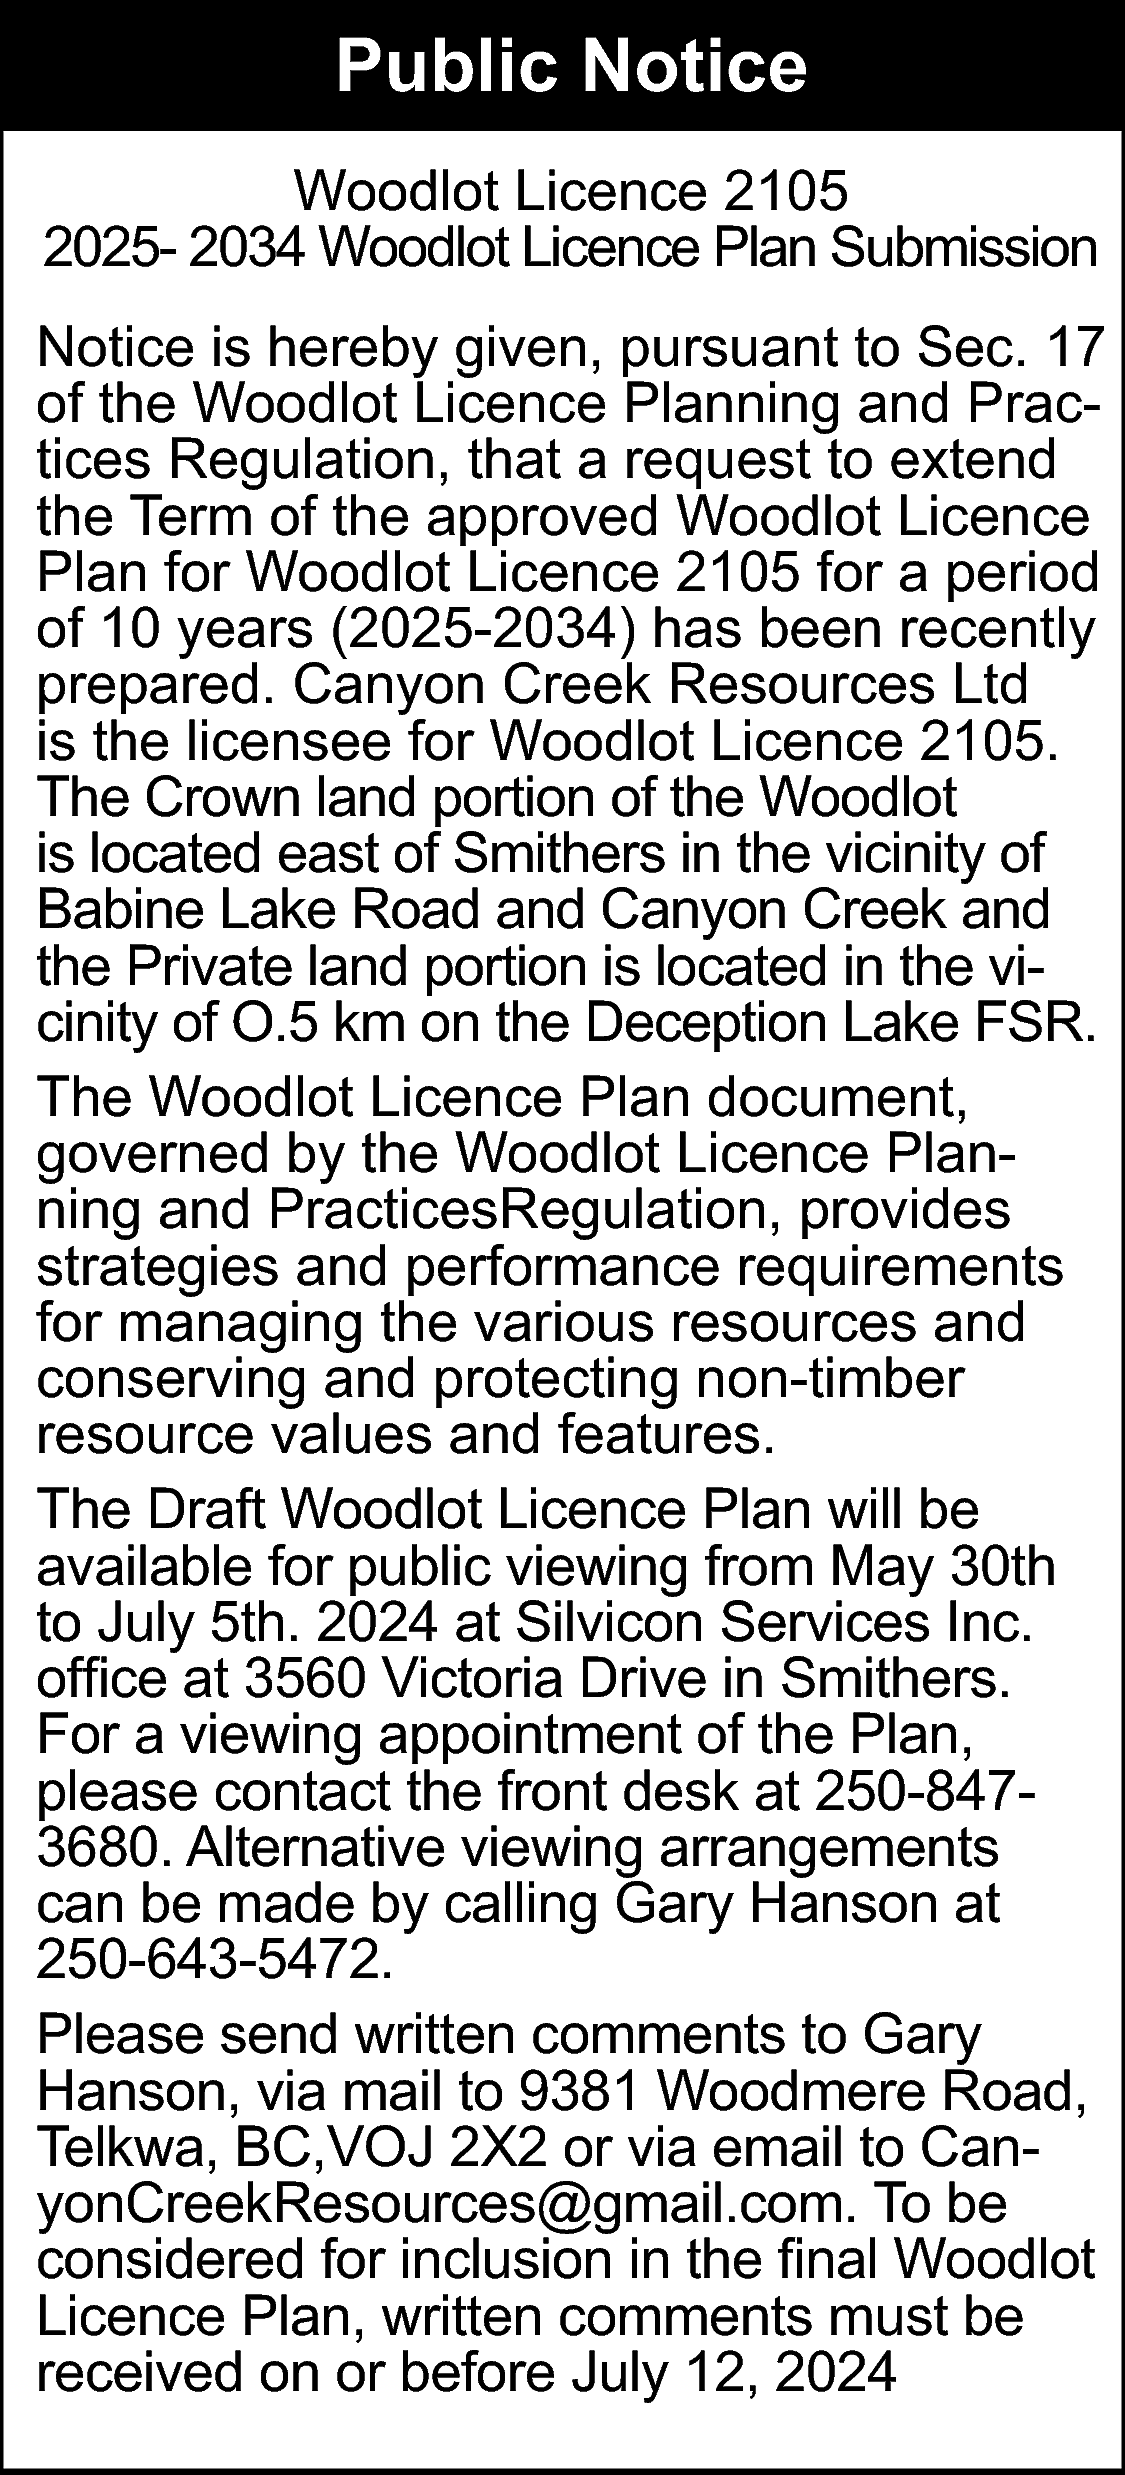 Public Notice <br>Woodlot Licence 2105  Public Notice  Woodlot Licence 2105  2025- 2034 Woodlot Licence Plan Submission  Notice is hereby given, pursuant to Sec. 17  of the Woodlot Licence Planning and Practices Regulation, that a request to extend  the Term of the approved Woodlot Licence  Plan for Woodlot Licence 2105 for a period  of 10 years (2025-2034) has been recently  prepared. Canyon Creek Resources Ltd  is the licensee for Woodlot Licence 2105.  The Crown land portion of the Woodlot  is located east of Smithers in the vicinity of  Babine Lake Road and Canyon Creek and  the Private land portion is located in the vicinity of O.5 km on the Deception Lake FSR.  The Woodlot Licence Plan document,  governed by the Woodlot Licence Planning and PracticesRegulation, provides  strategies and performance requirements  for managing the various resources and  conserving and protecting non-timber  resource values and features.  The Draft Woodlot Licence Plan will be  available for public viewing from May 30th  to July 5th. 2024 at Silvicon Services Inc.  office at 3560 Victoria Drive in Smithers.  For a viewing appointment of the Plan,  please contact the front desk at 250-8473680. Alternative viewing arrangements  can be made by calling Gary Hanson at  250-643-5472.  Please send written comments to Gary  Hanson, via mail to 9381 Woodmere Road,  Telkwa, BC,VOJ 2X2 or via email to CanyonCreekResources@gmail.com. To be  considered for inclusion in the final Woodlot  Licence Plan, written comments must be  received on or before July 12, 2024    